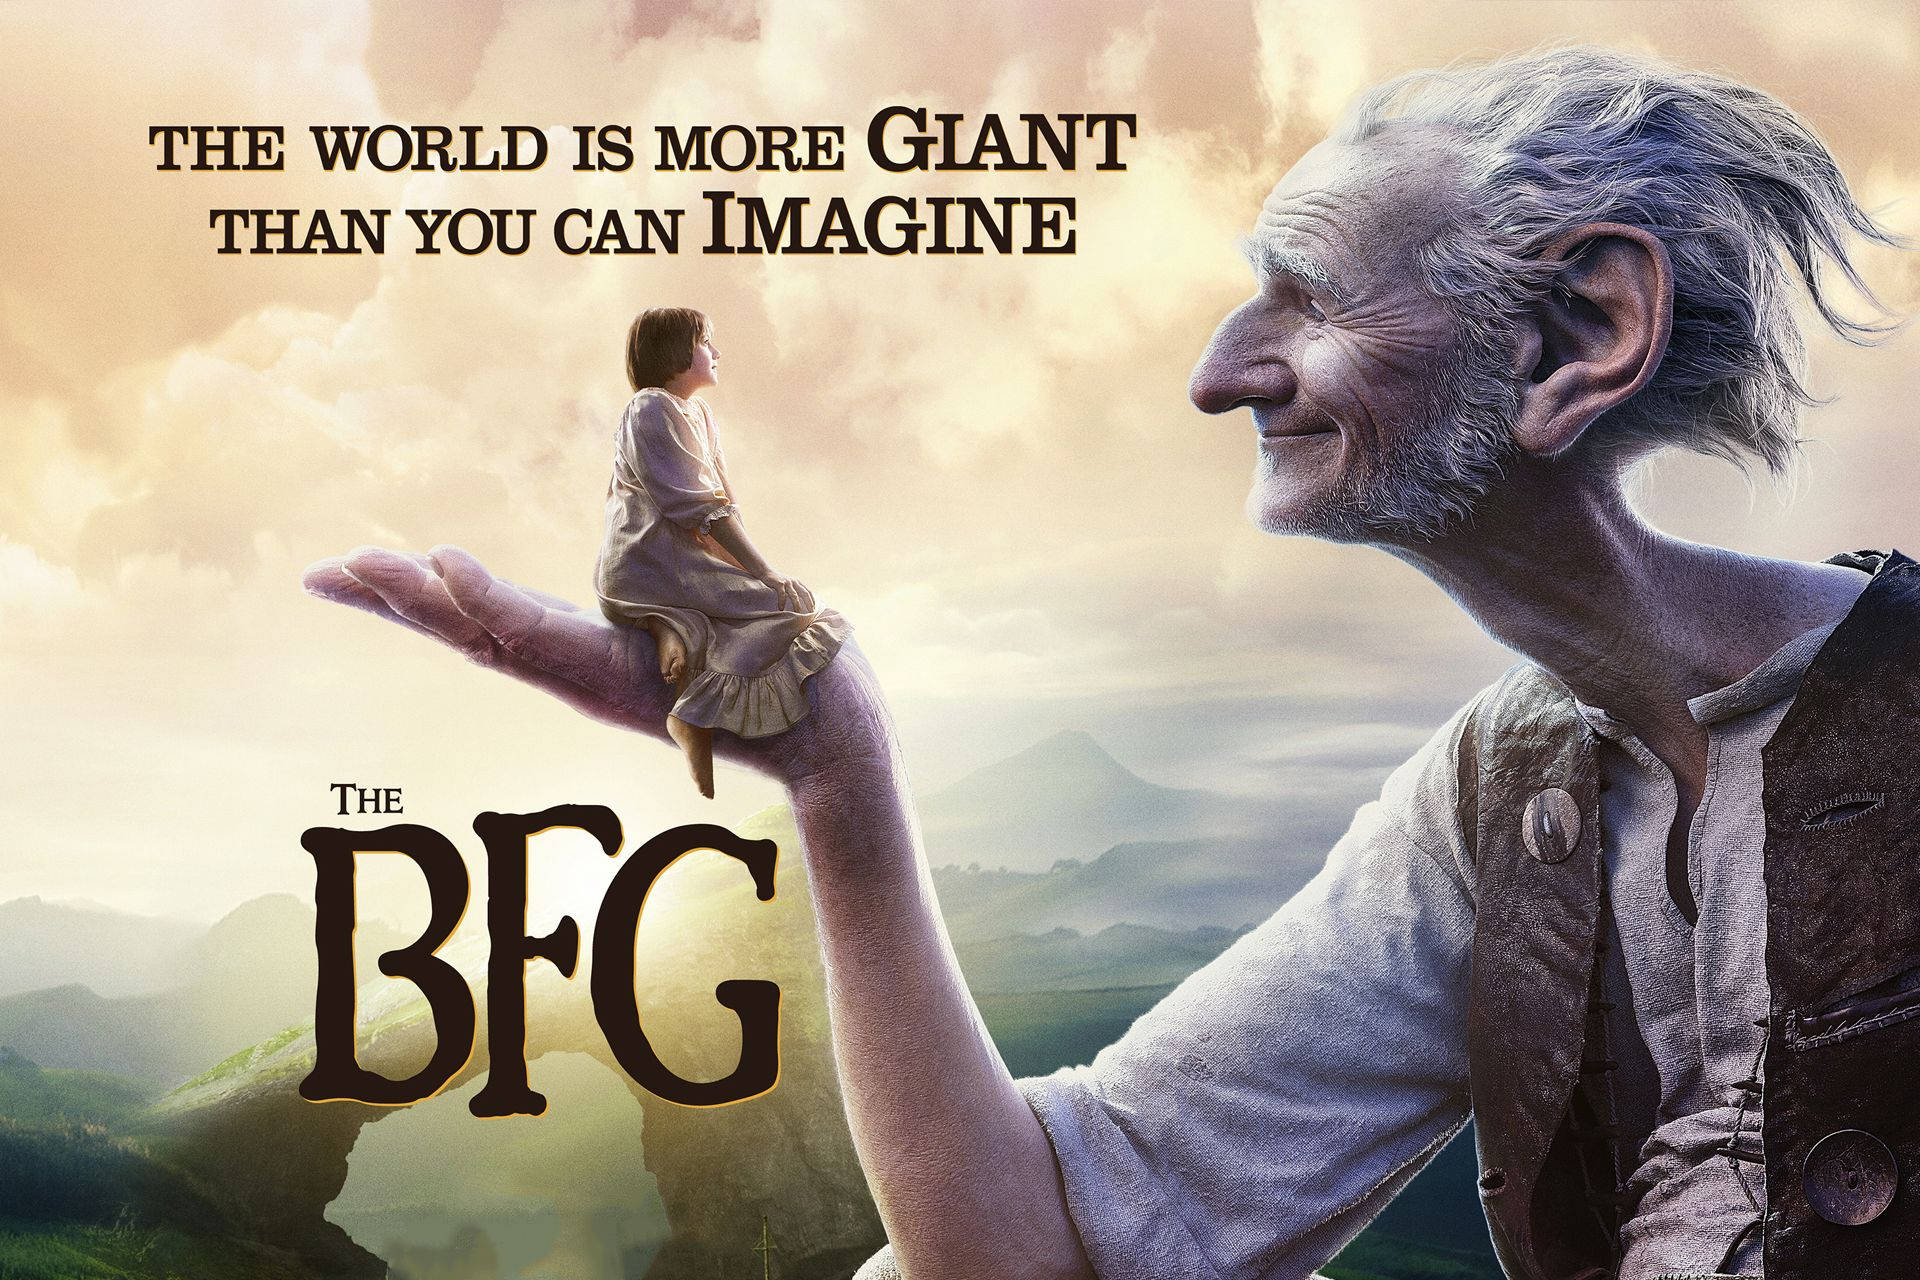 The Bfg Quote Wallpaper